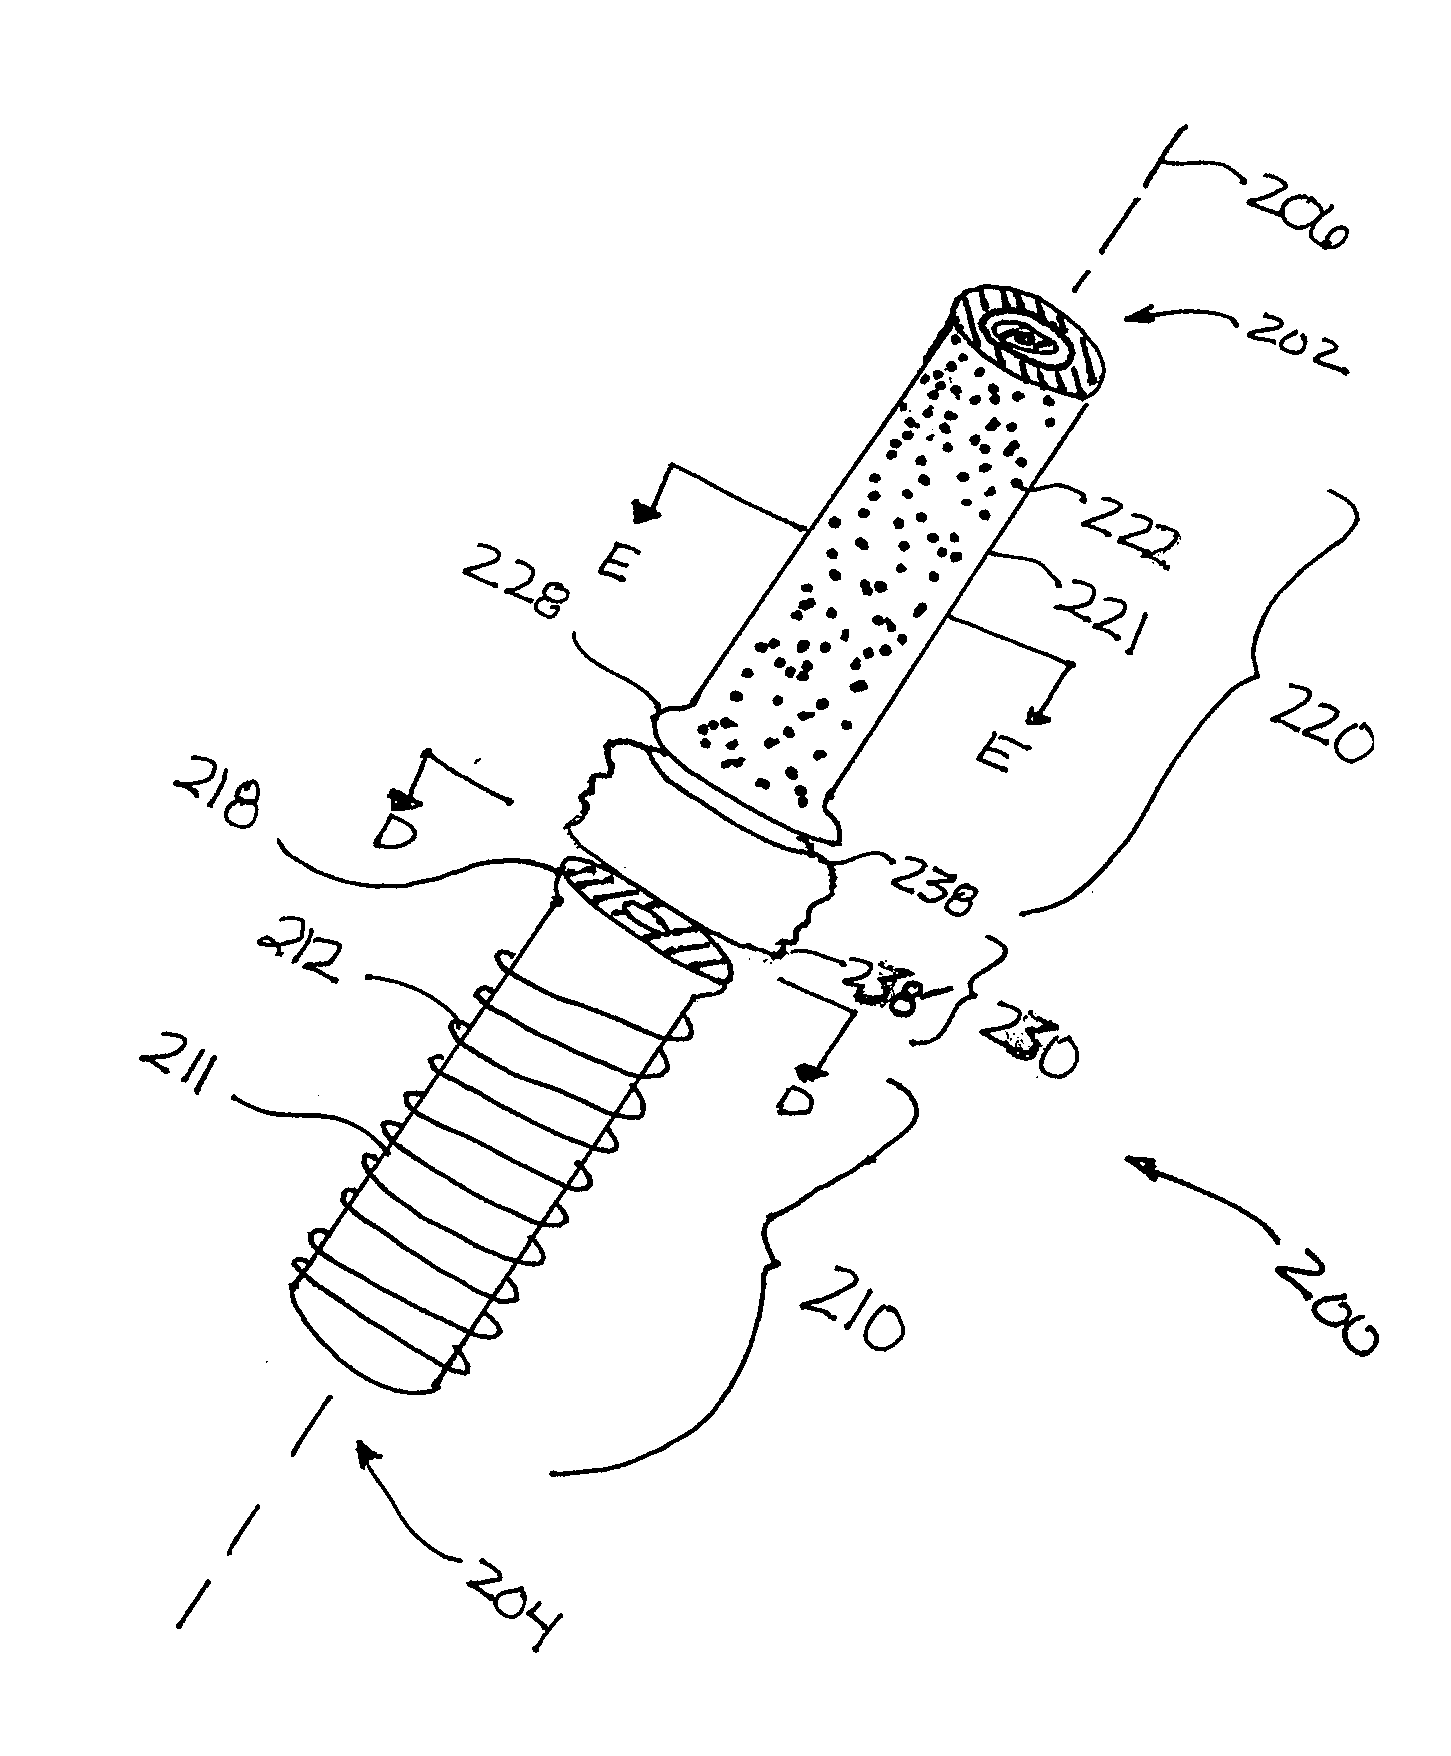 Polymeric joint complex and methods of use